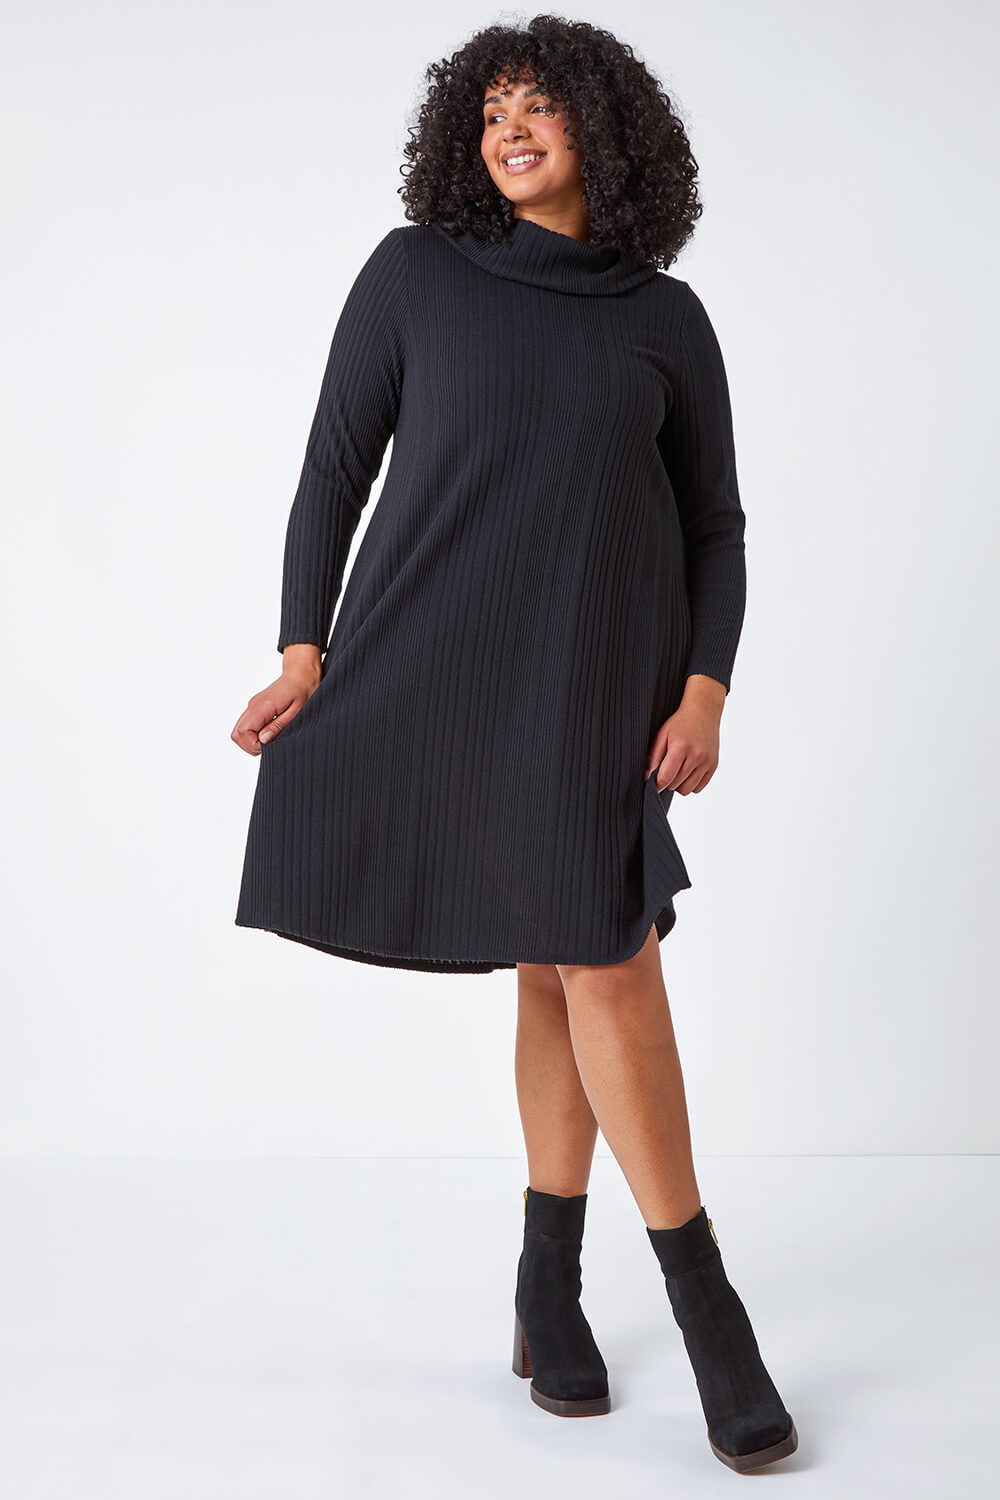 Black Curve Roll Neck Ribbed Stretch Dress, Image 2 of 5